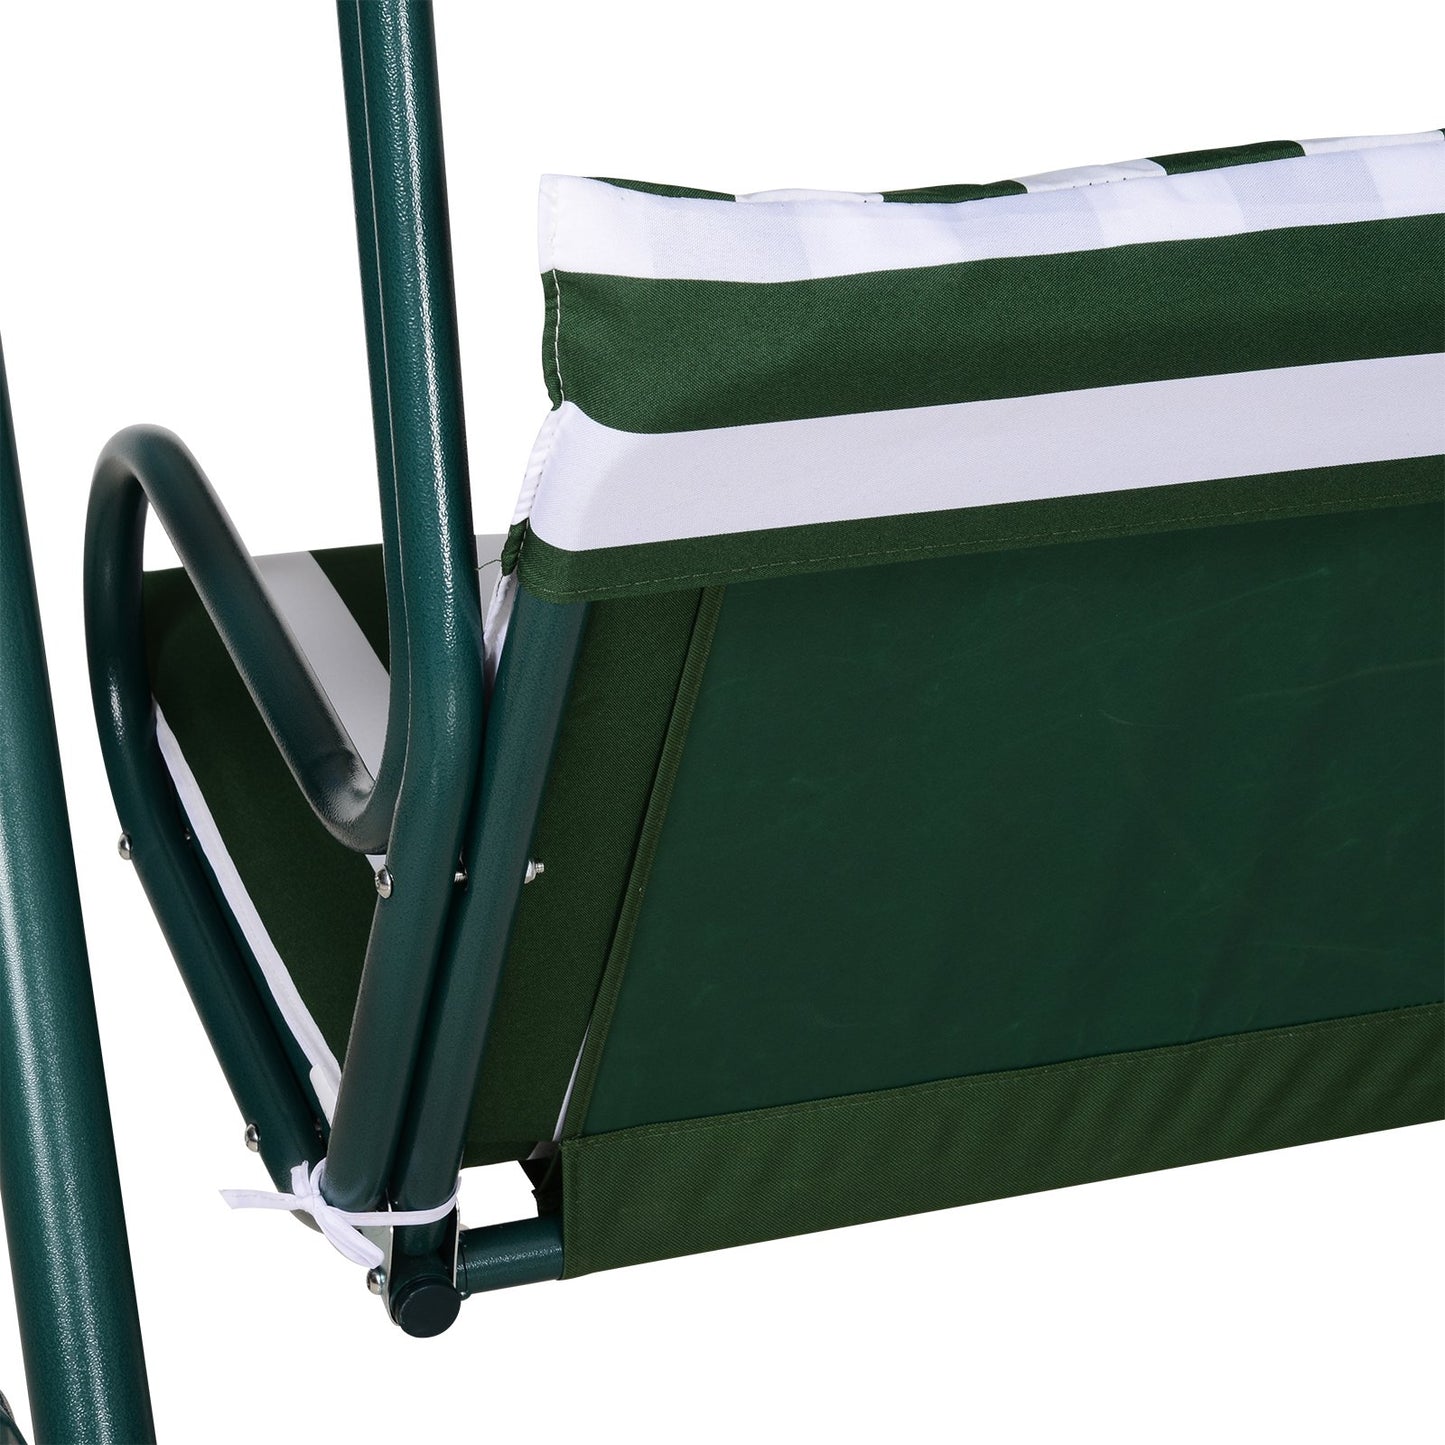 Outsunny Steel 3-Seater Garden Swing Chair w/ Canopy Green